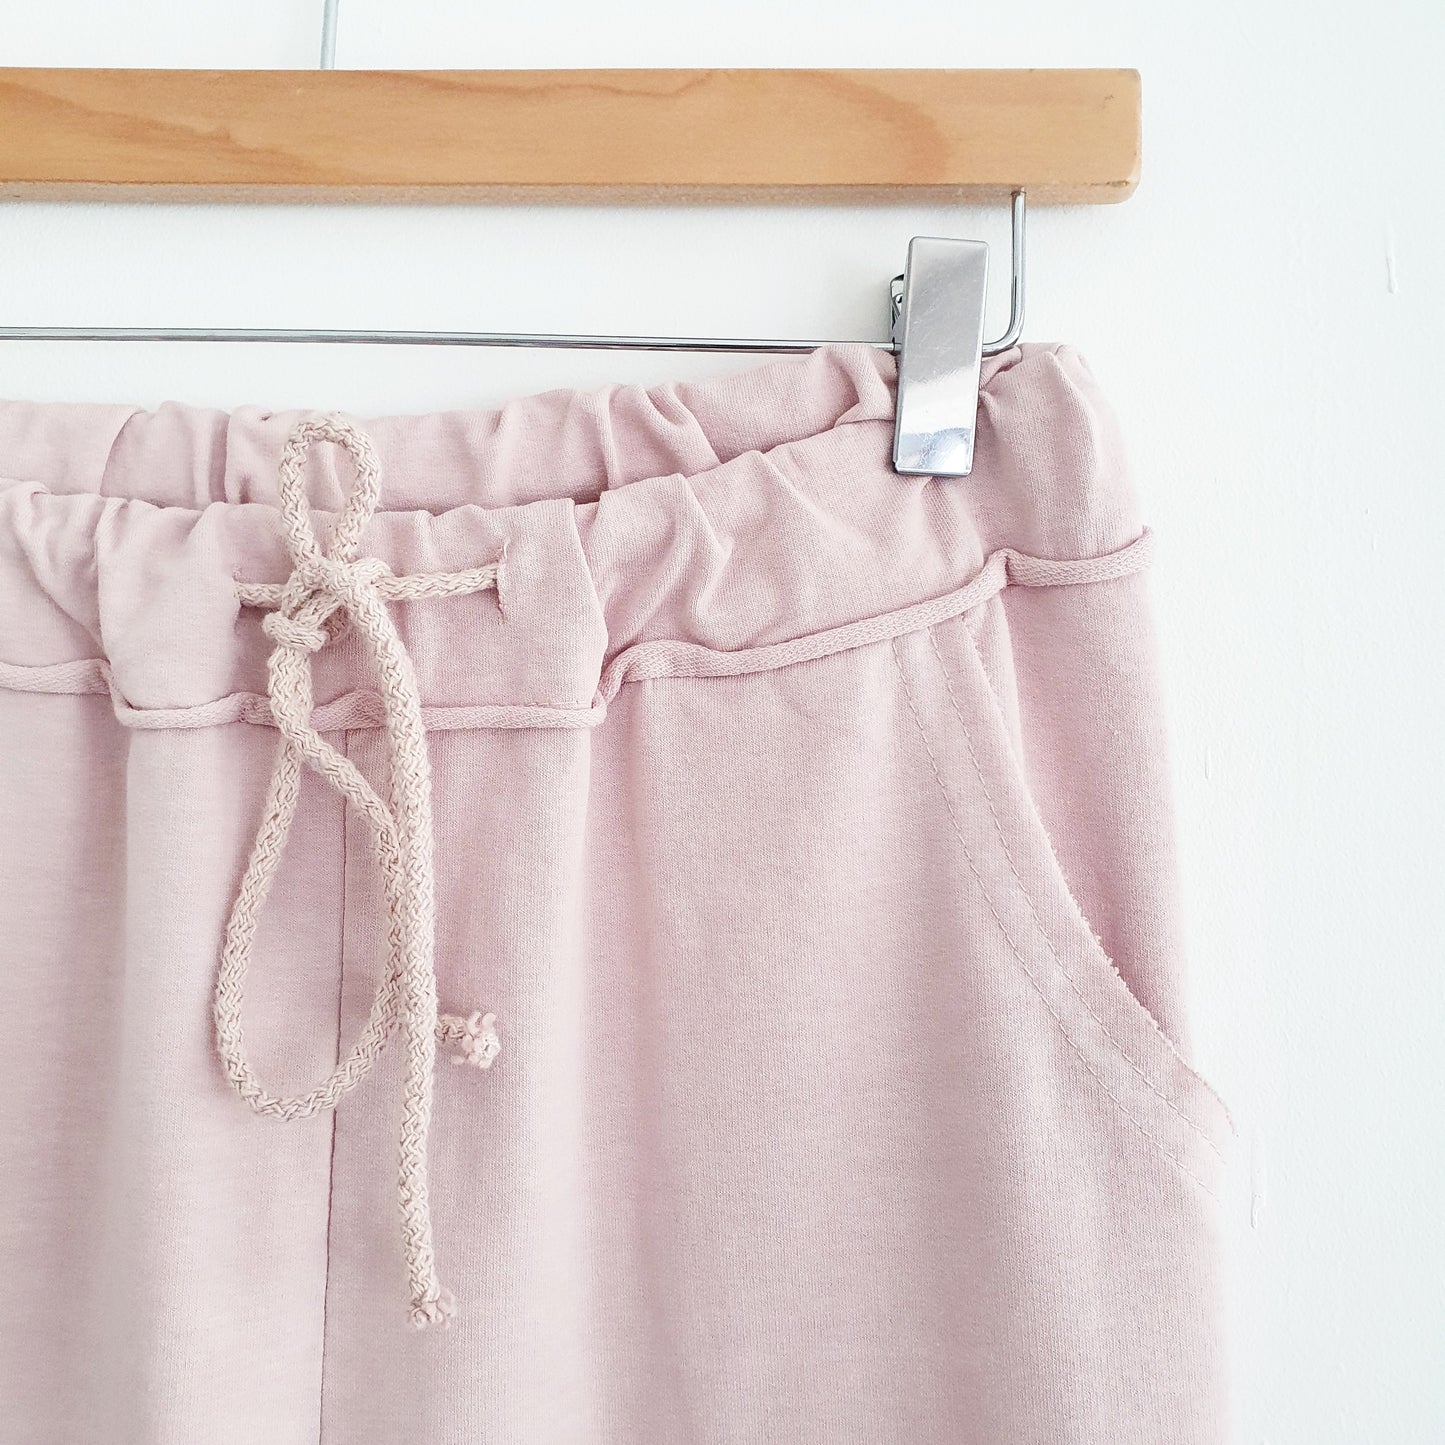 Cotton Lounge Pants in Pink